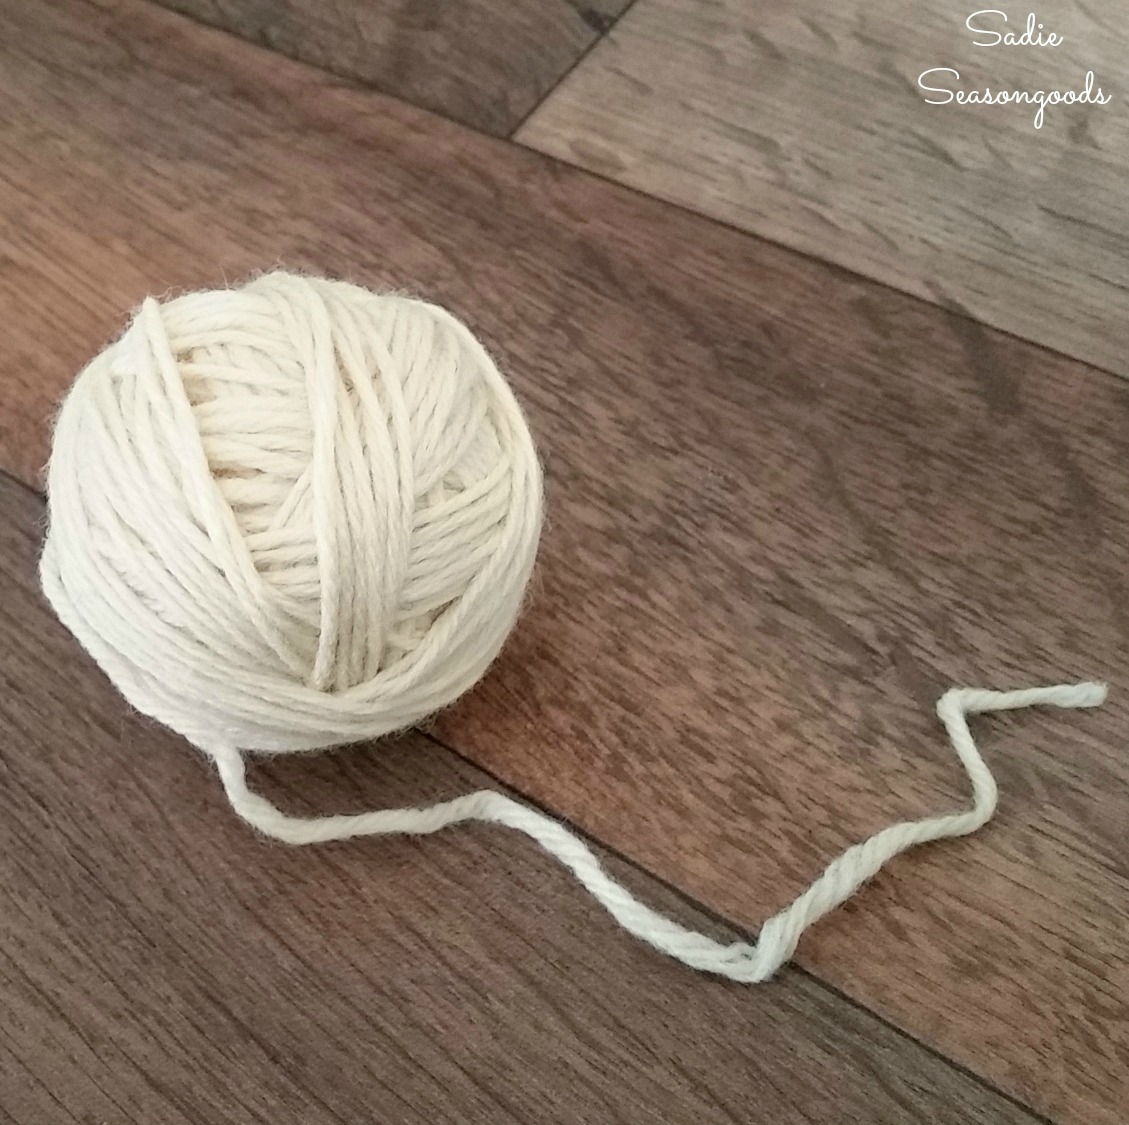 Tumble dryer balls or dryer balls are a natural fabric softener for sustainable homes by Sadie Seasongoods